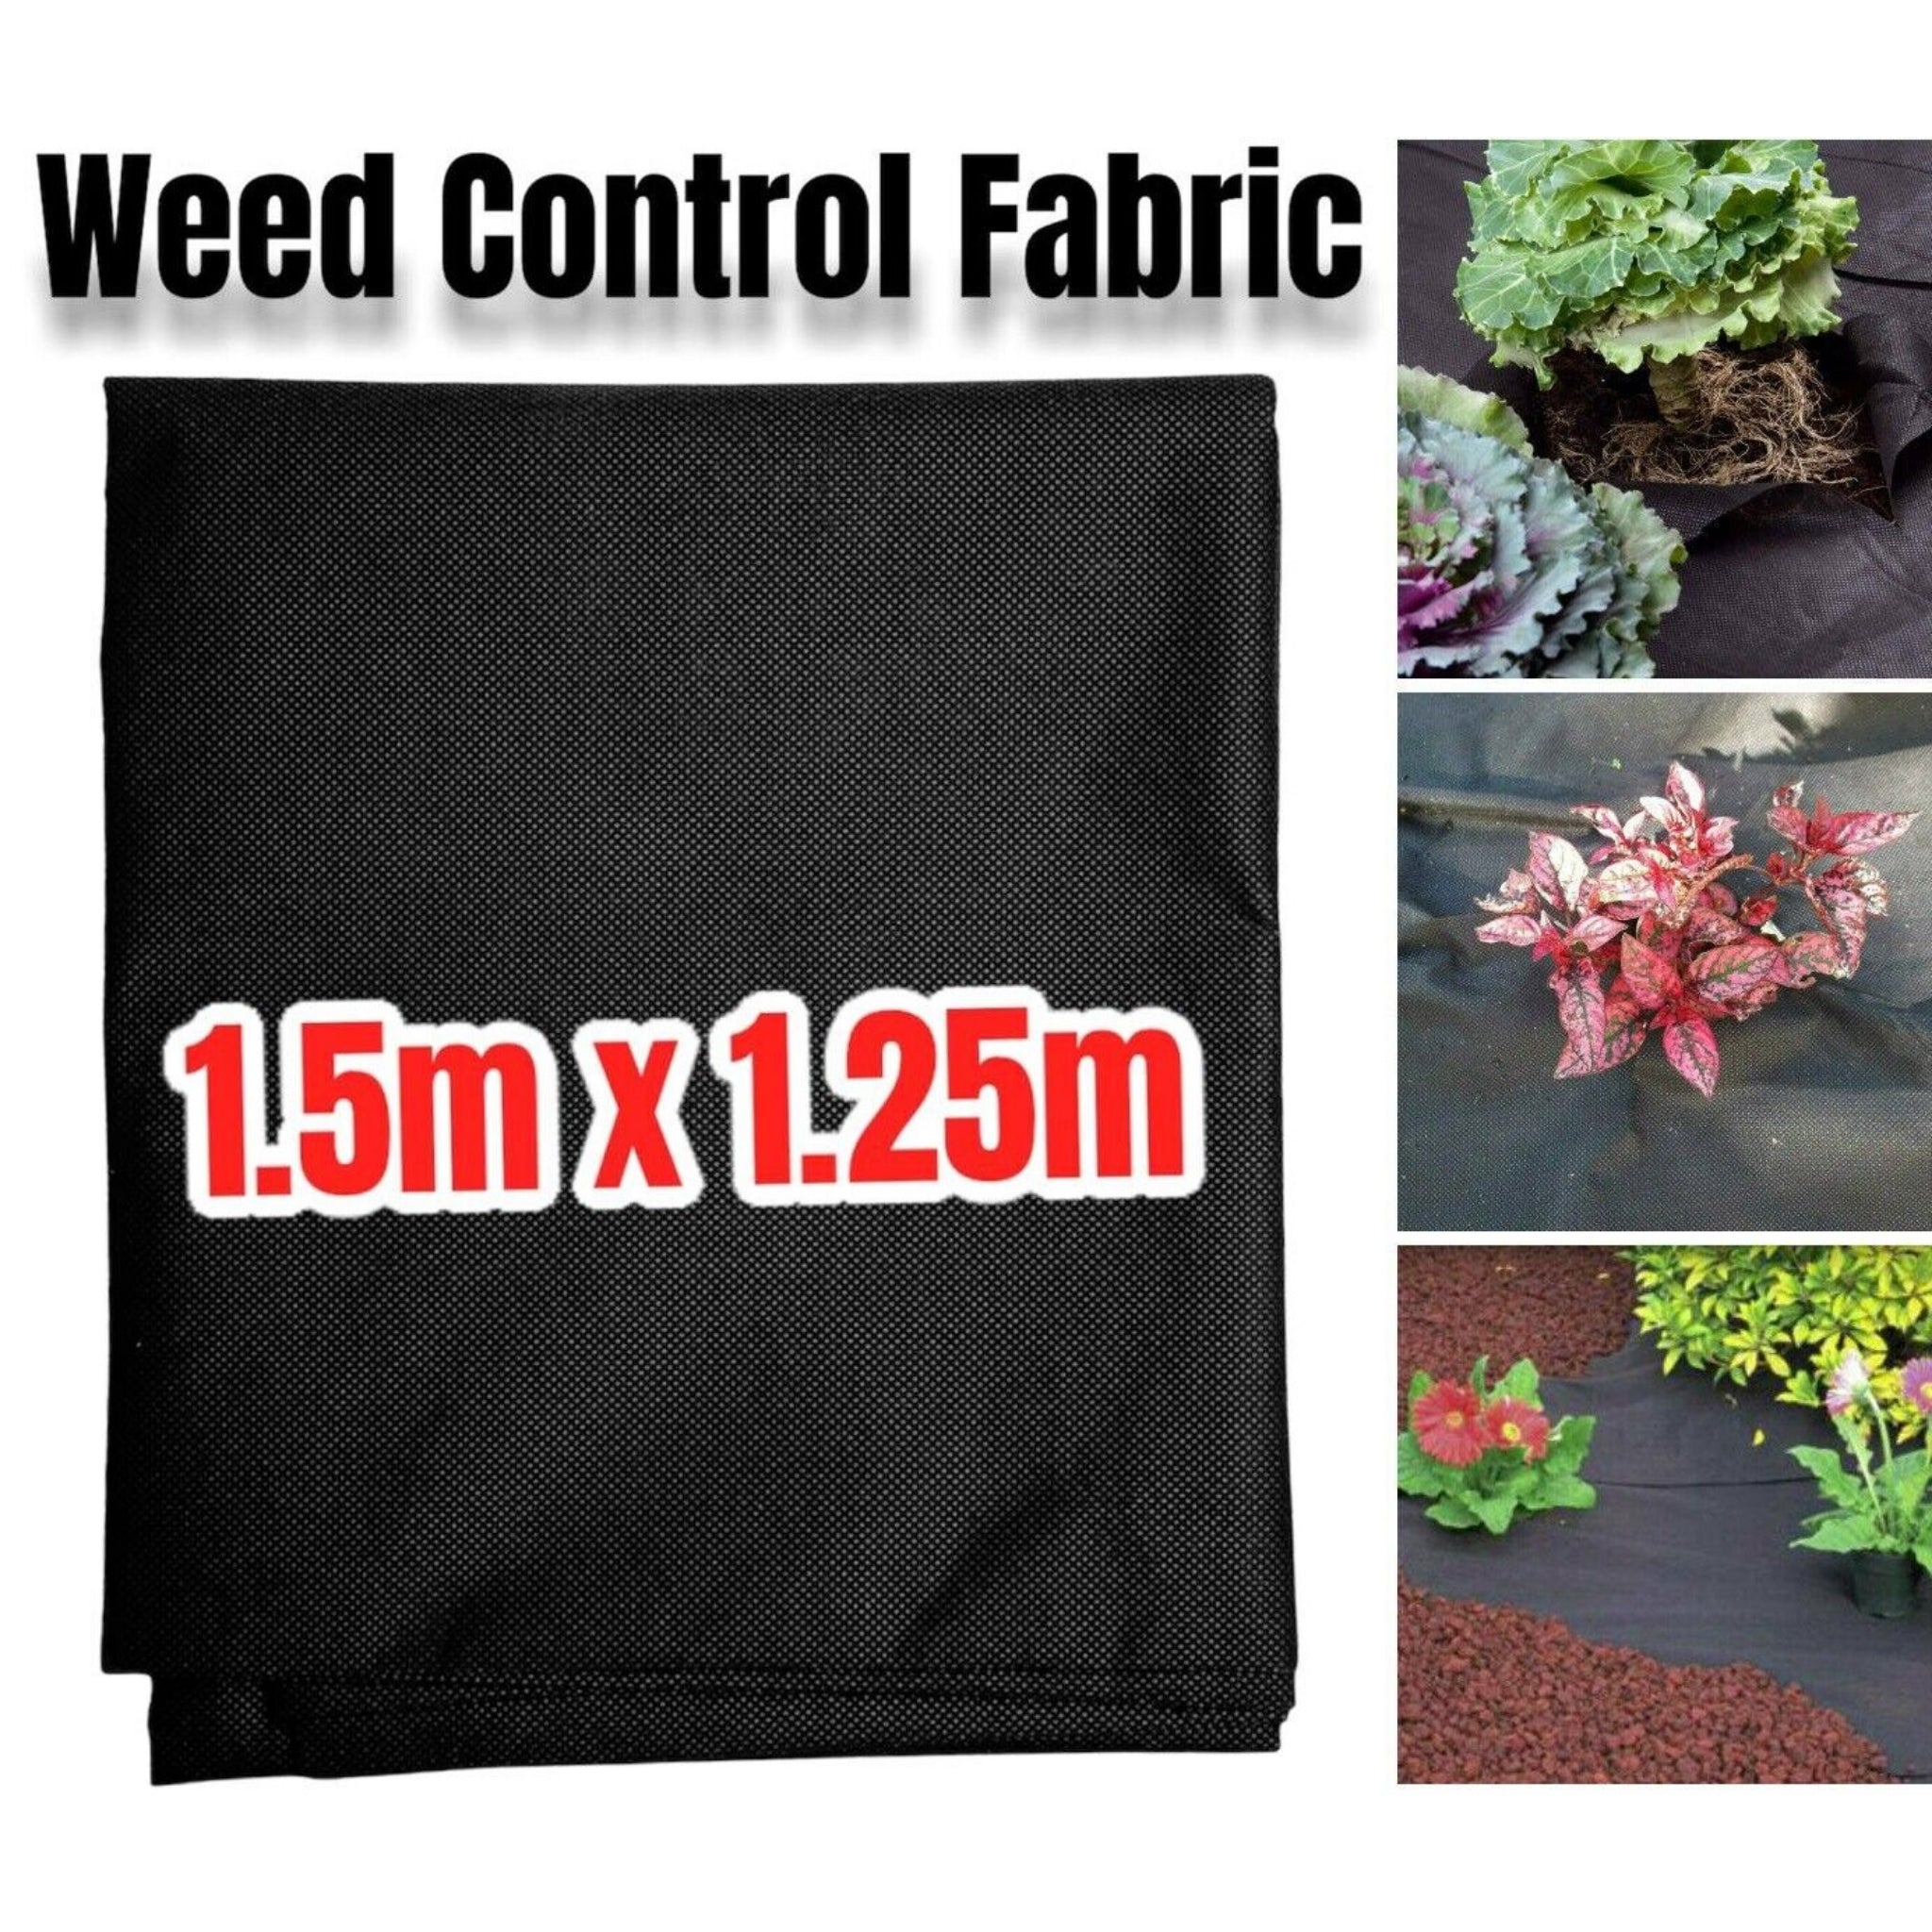 Beclen Harp 1.5m Wide Weed Control Fabric Ground Cover Membrane Garden Landscape